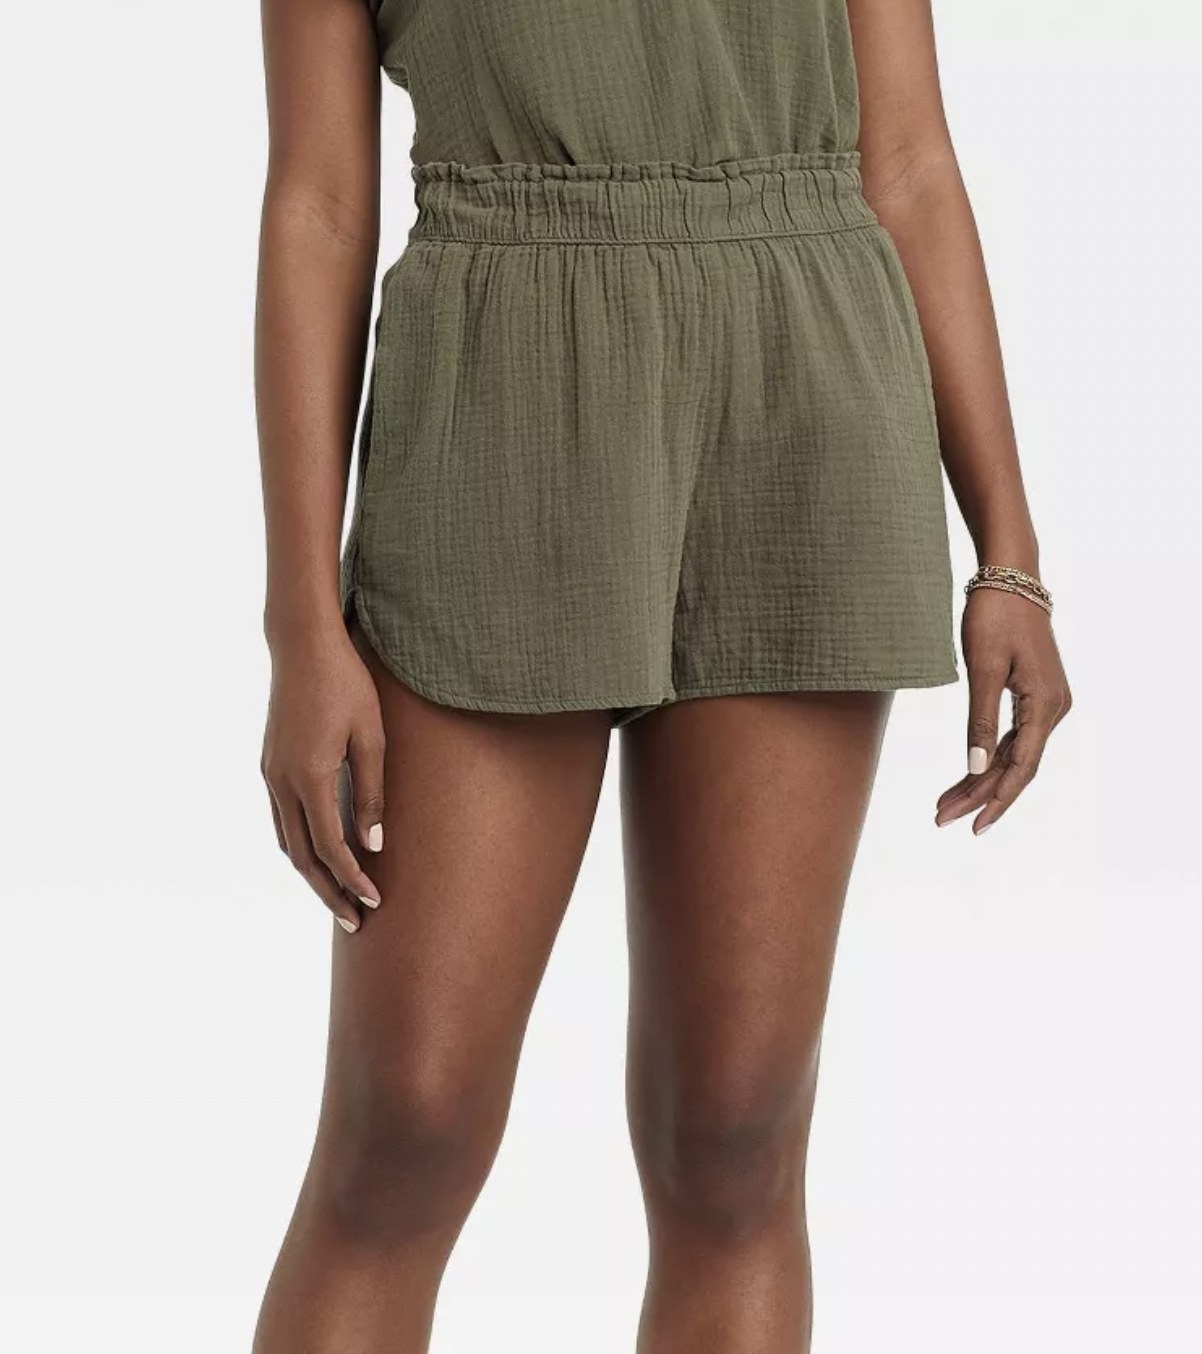 front view of the model wearing the shorts in green